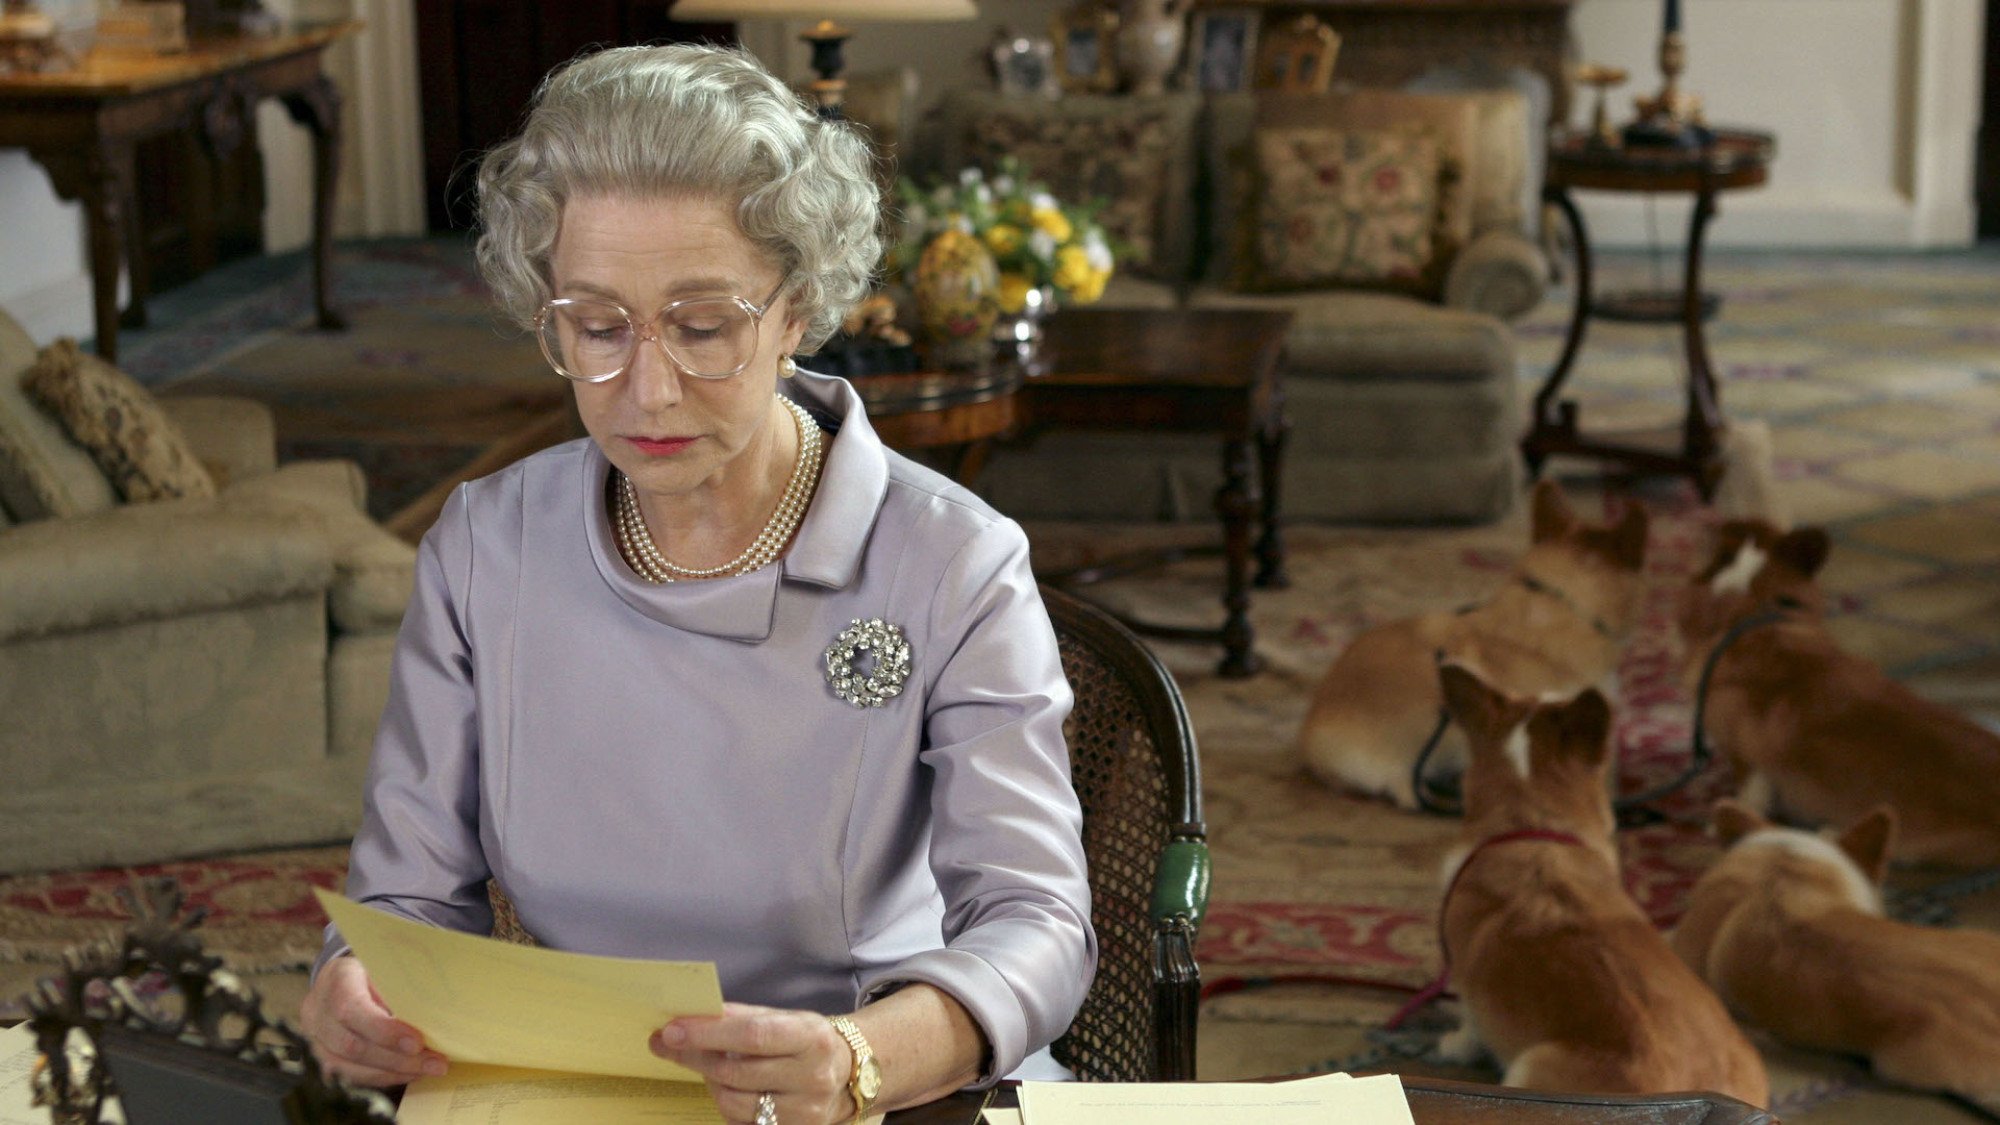 An actor dressed up as Queen Elizabeth II reading letters with her corgis in the background.